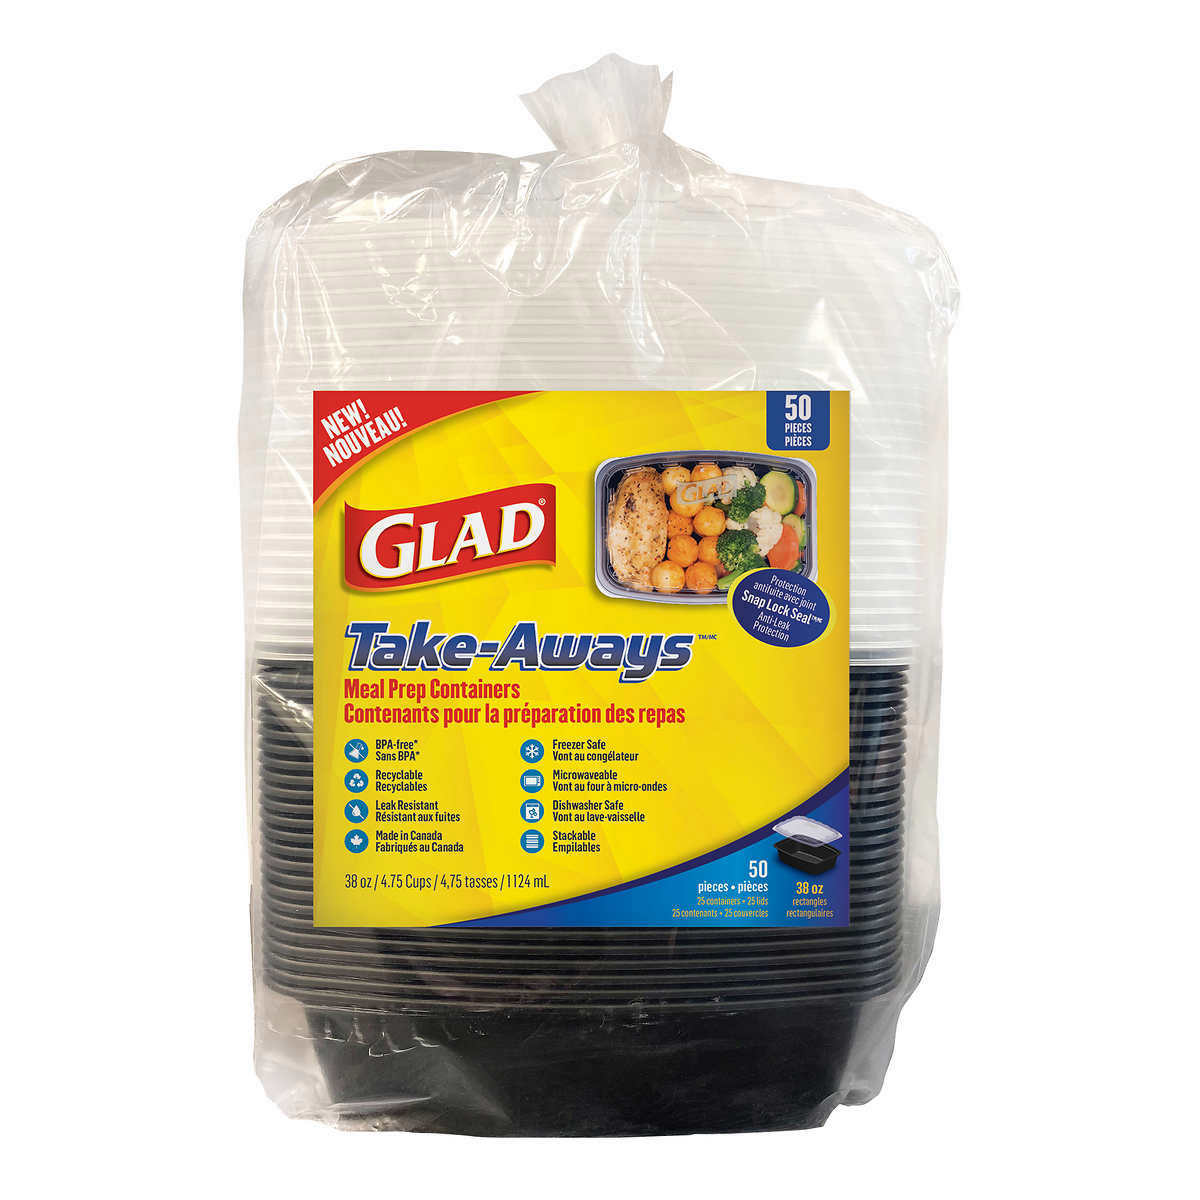 Glad Take-Aways 38-oz rectangular food containers pack of 25 offer at Costco